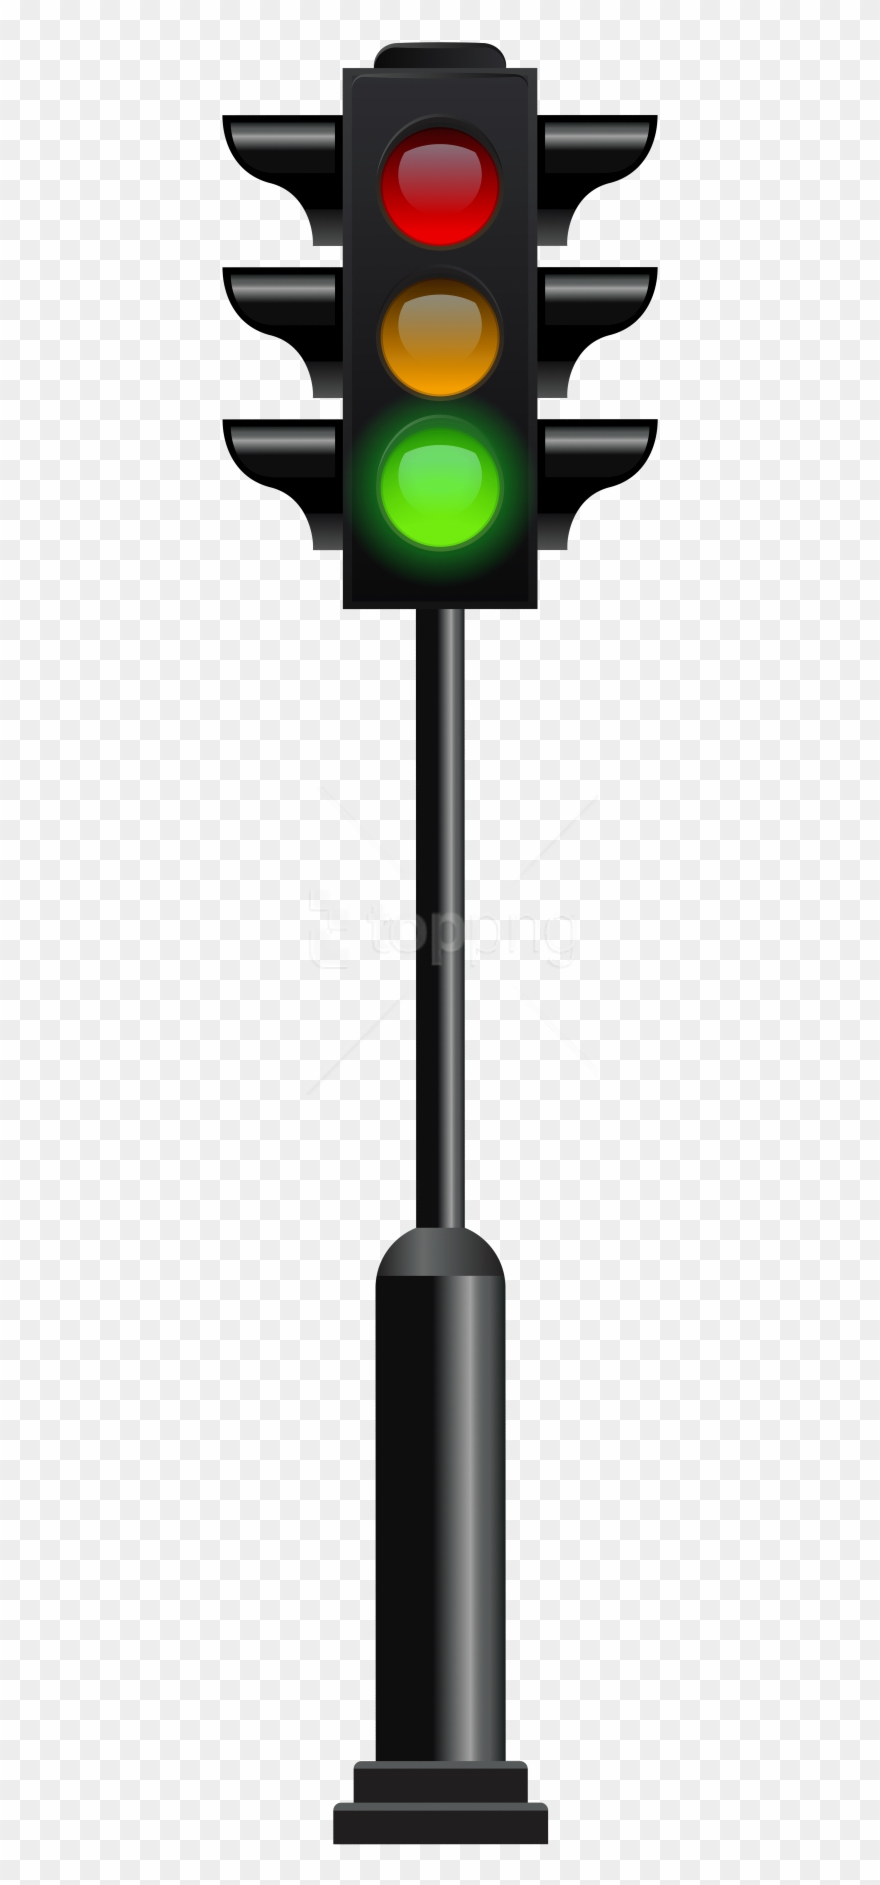 Free Png Download Traffic Light Clipart Png Photo Png.